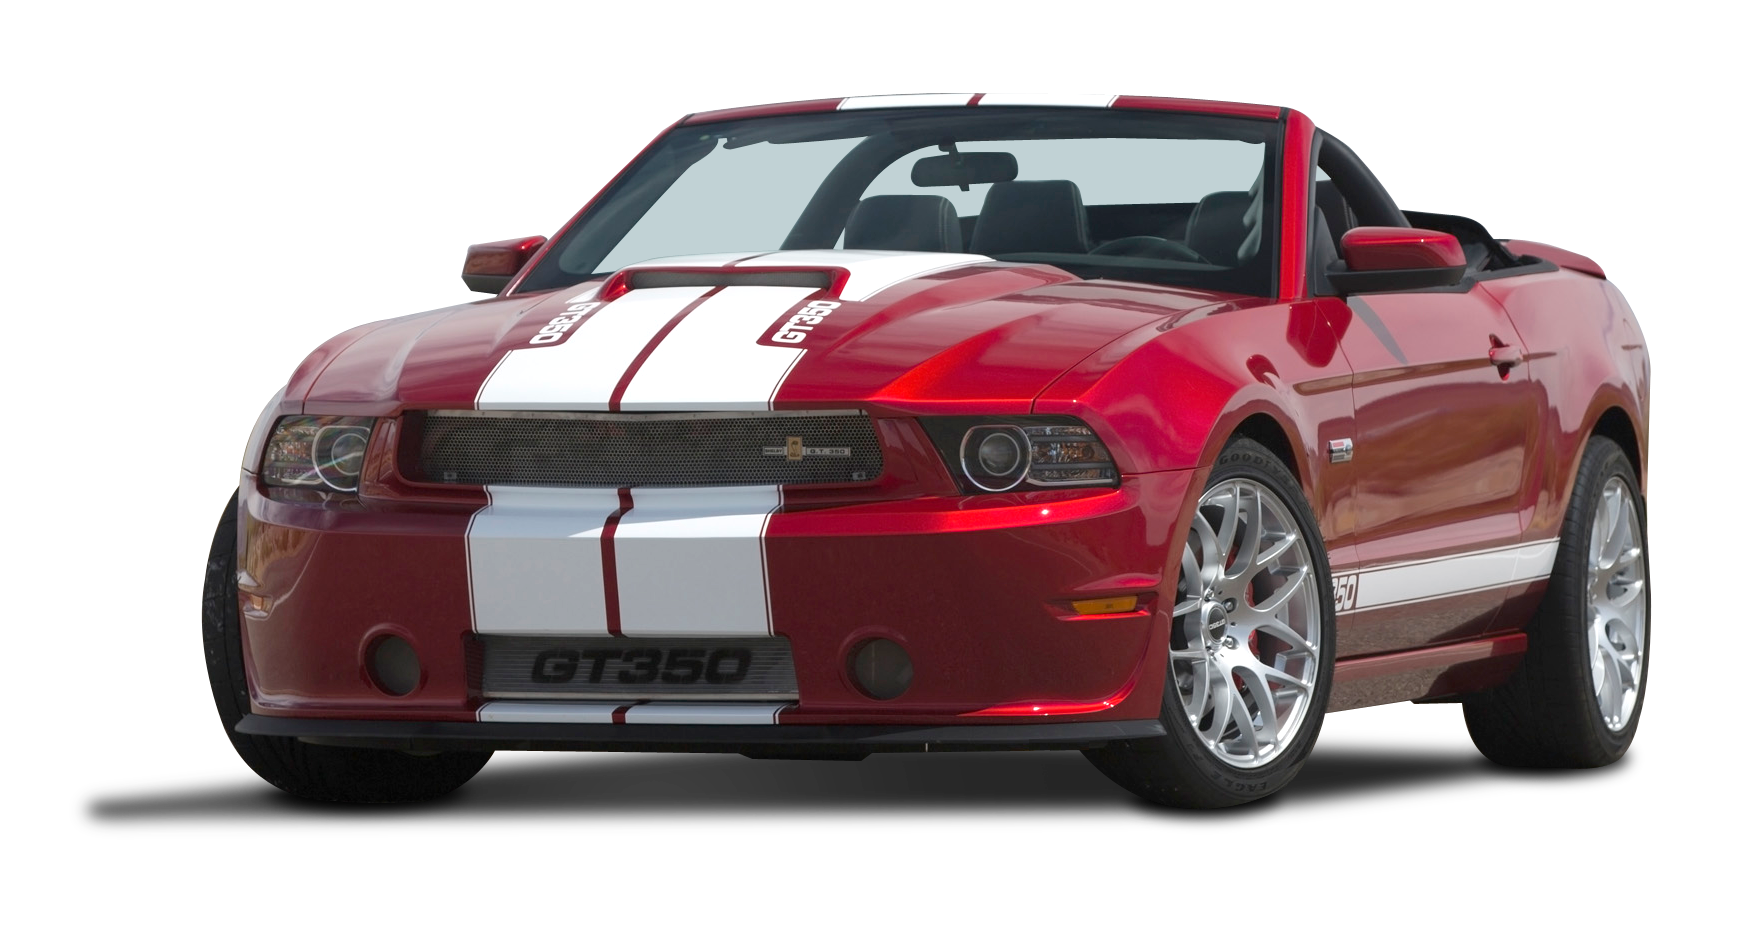 Ford Mustang Shelby GT350 Car PNG Image